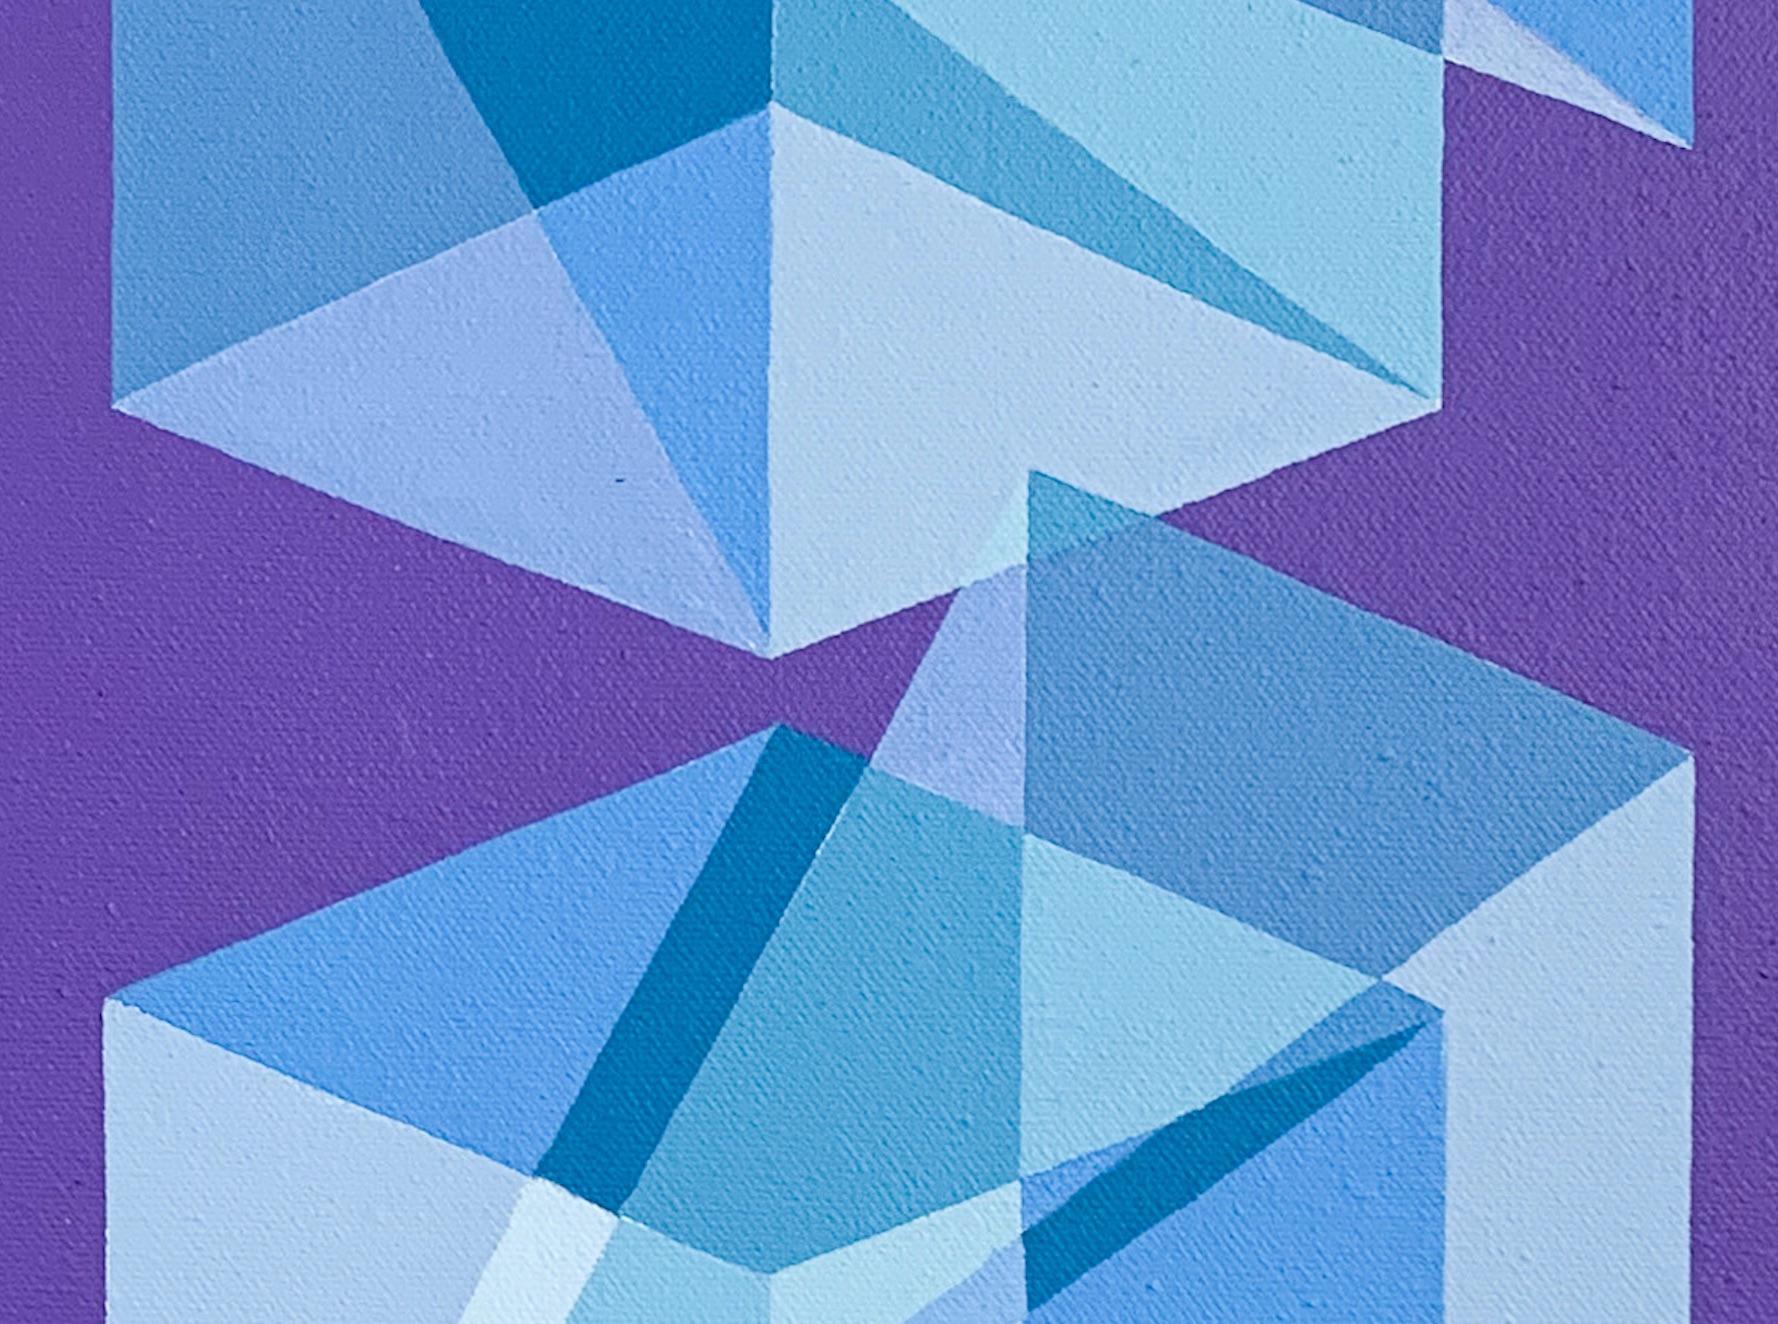 Cubes Divided Equally into Three #16: geometric abstraction w/ very peri & blue - Painting by Benjamin Weaver